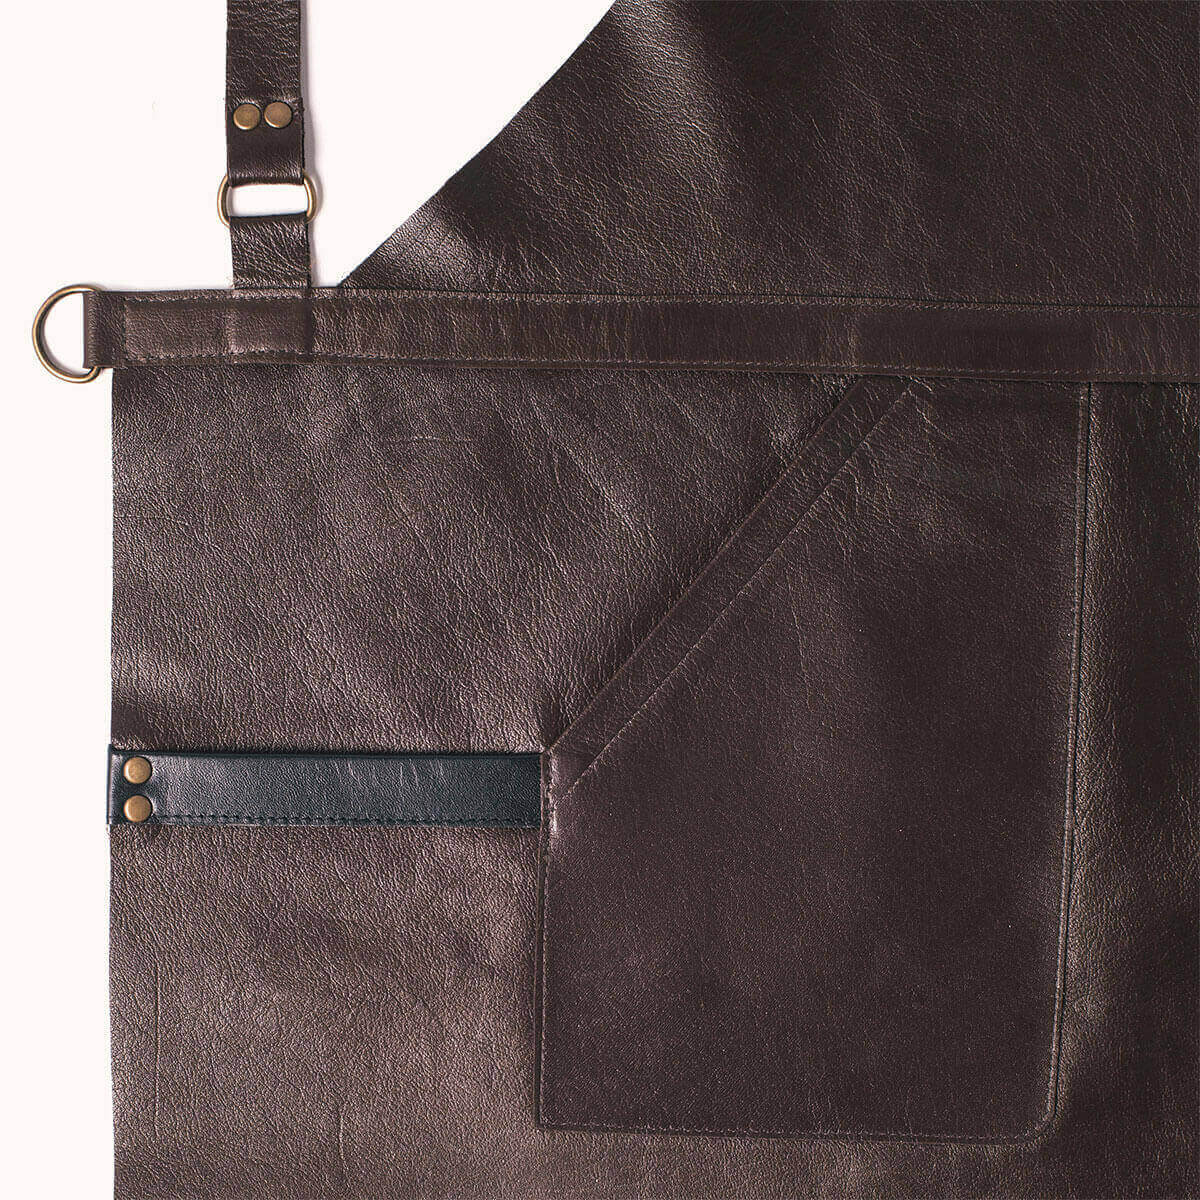 Deluxe Leather Apron (Chocolate Brown)